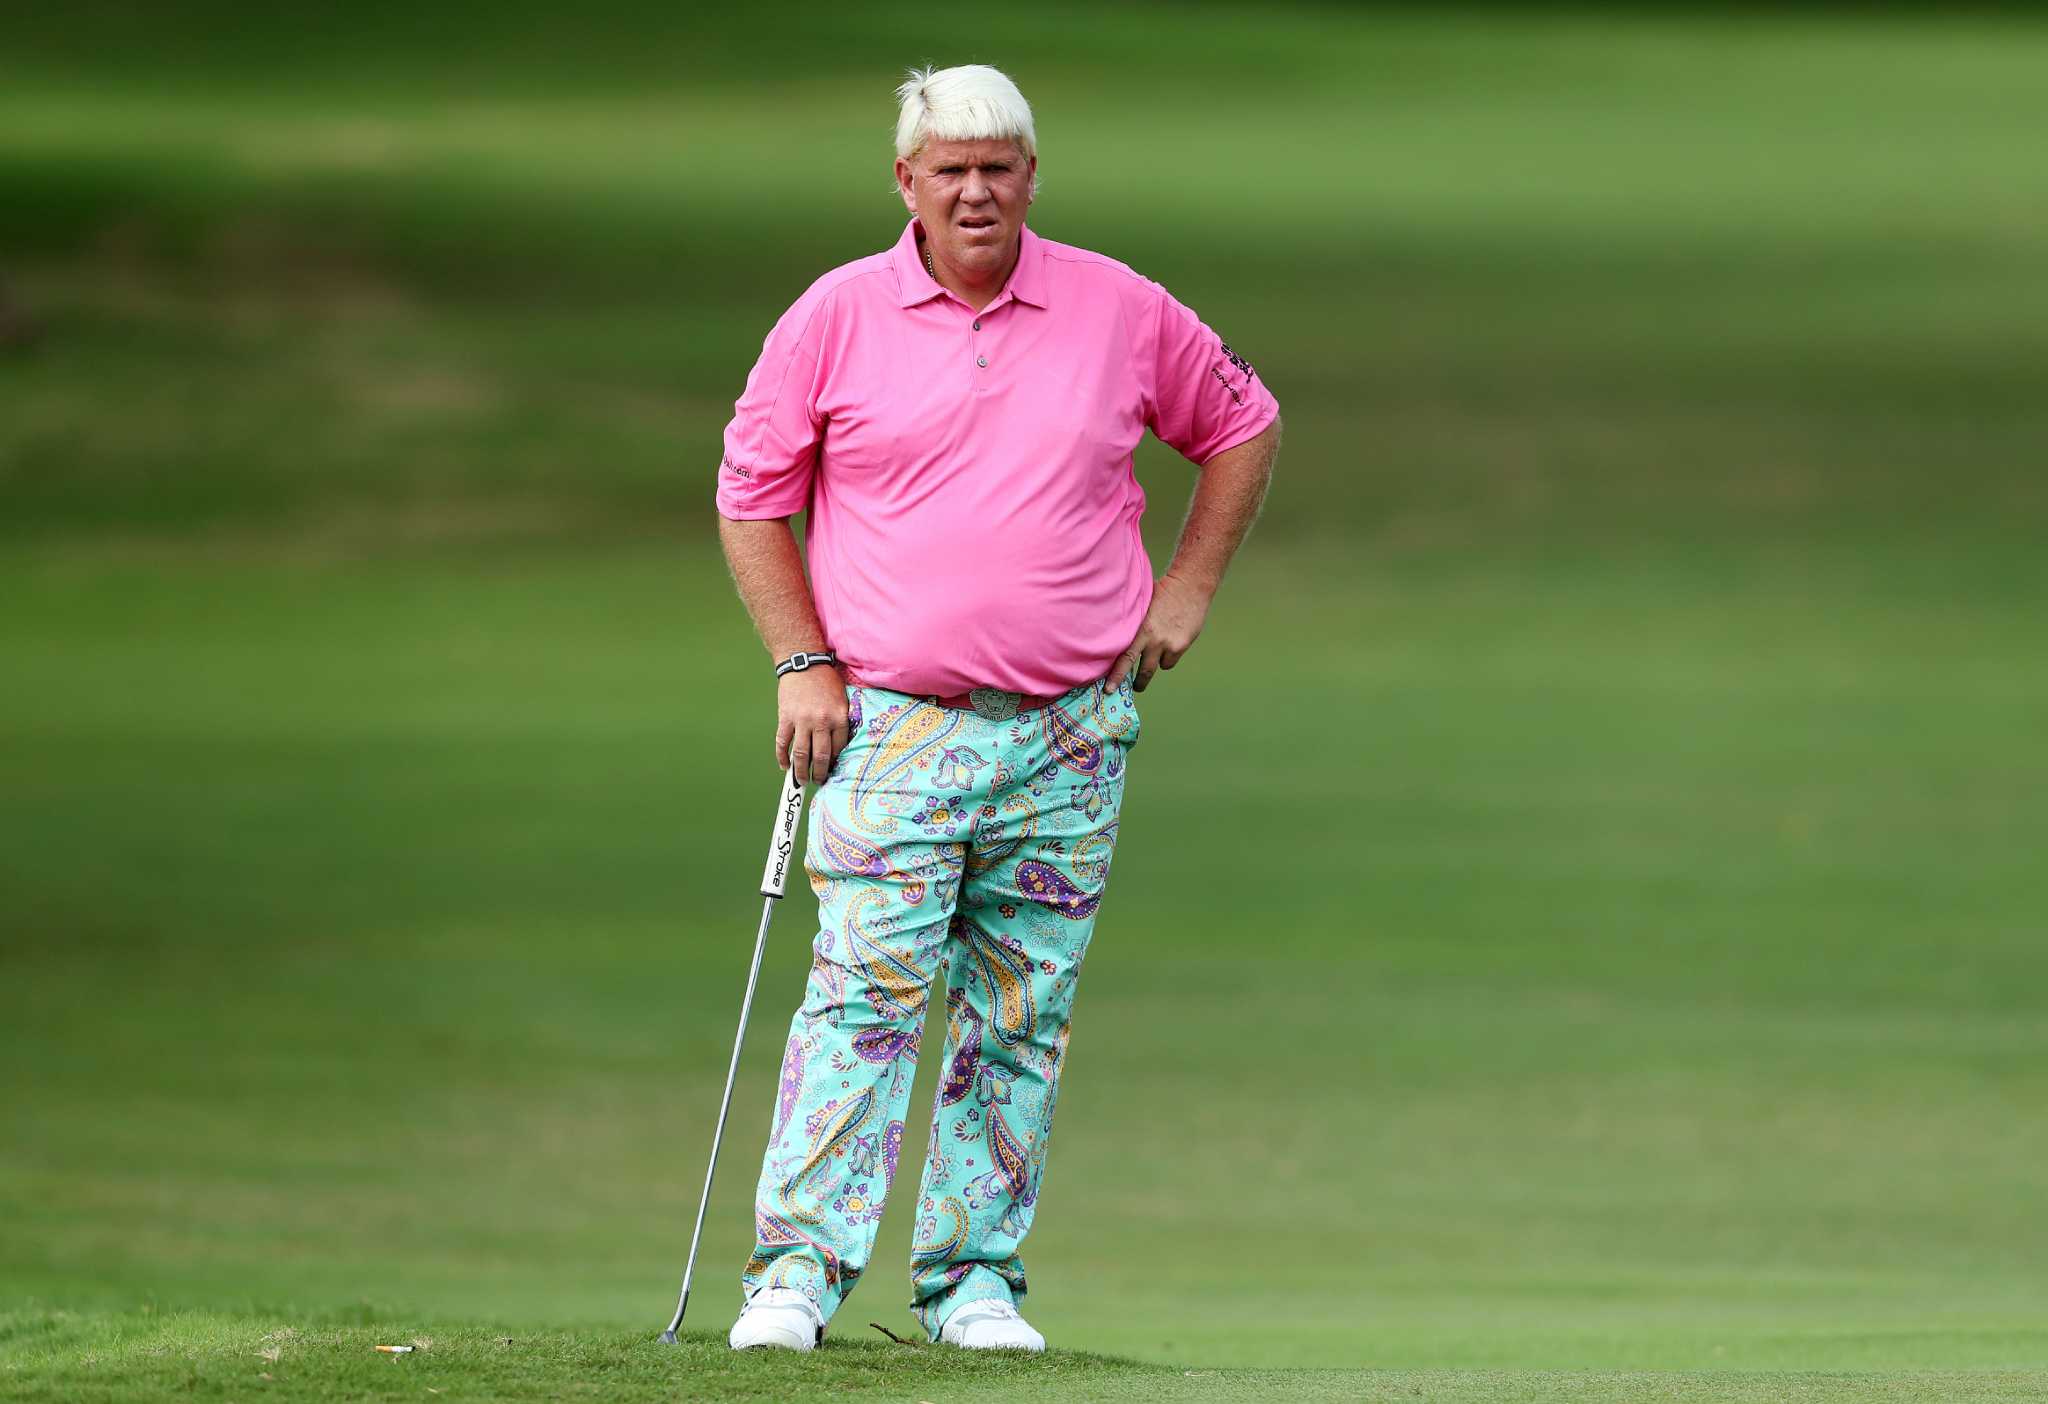 With his best opening round in nearly 10 years, John Daly played bogey-free...